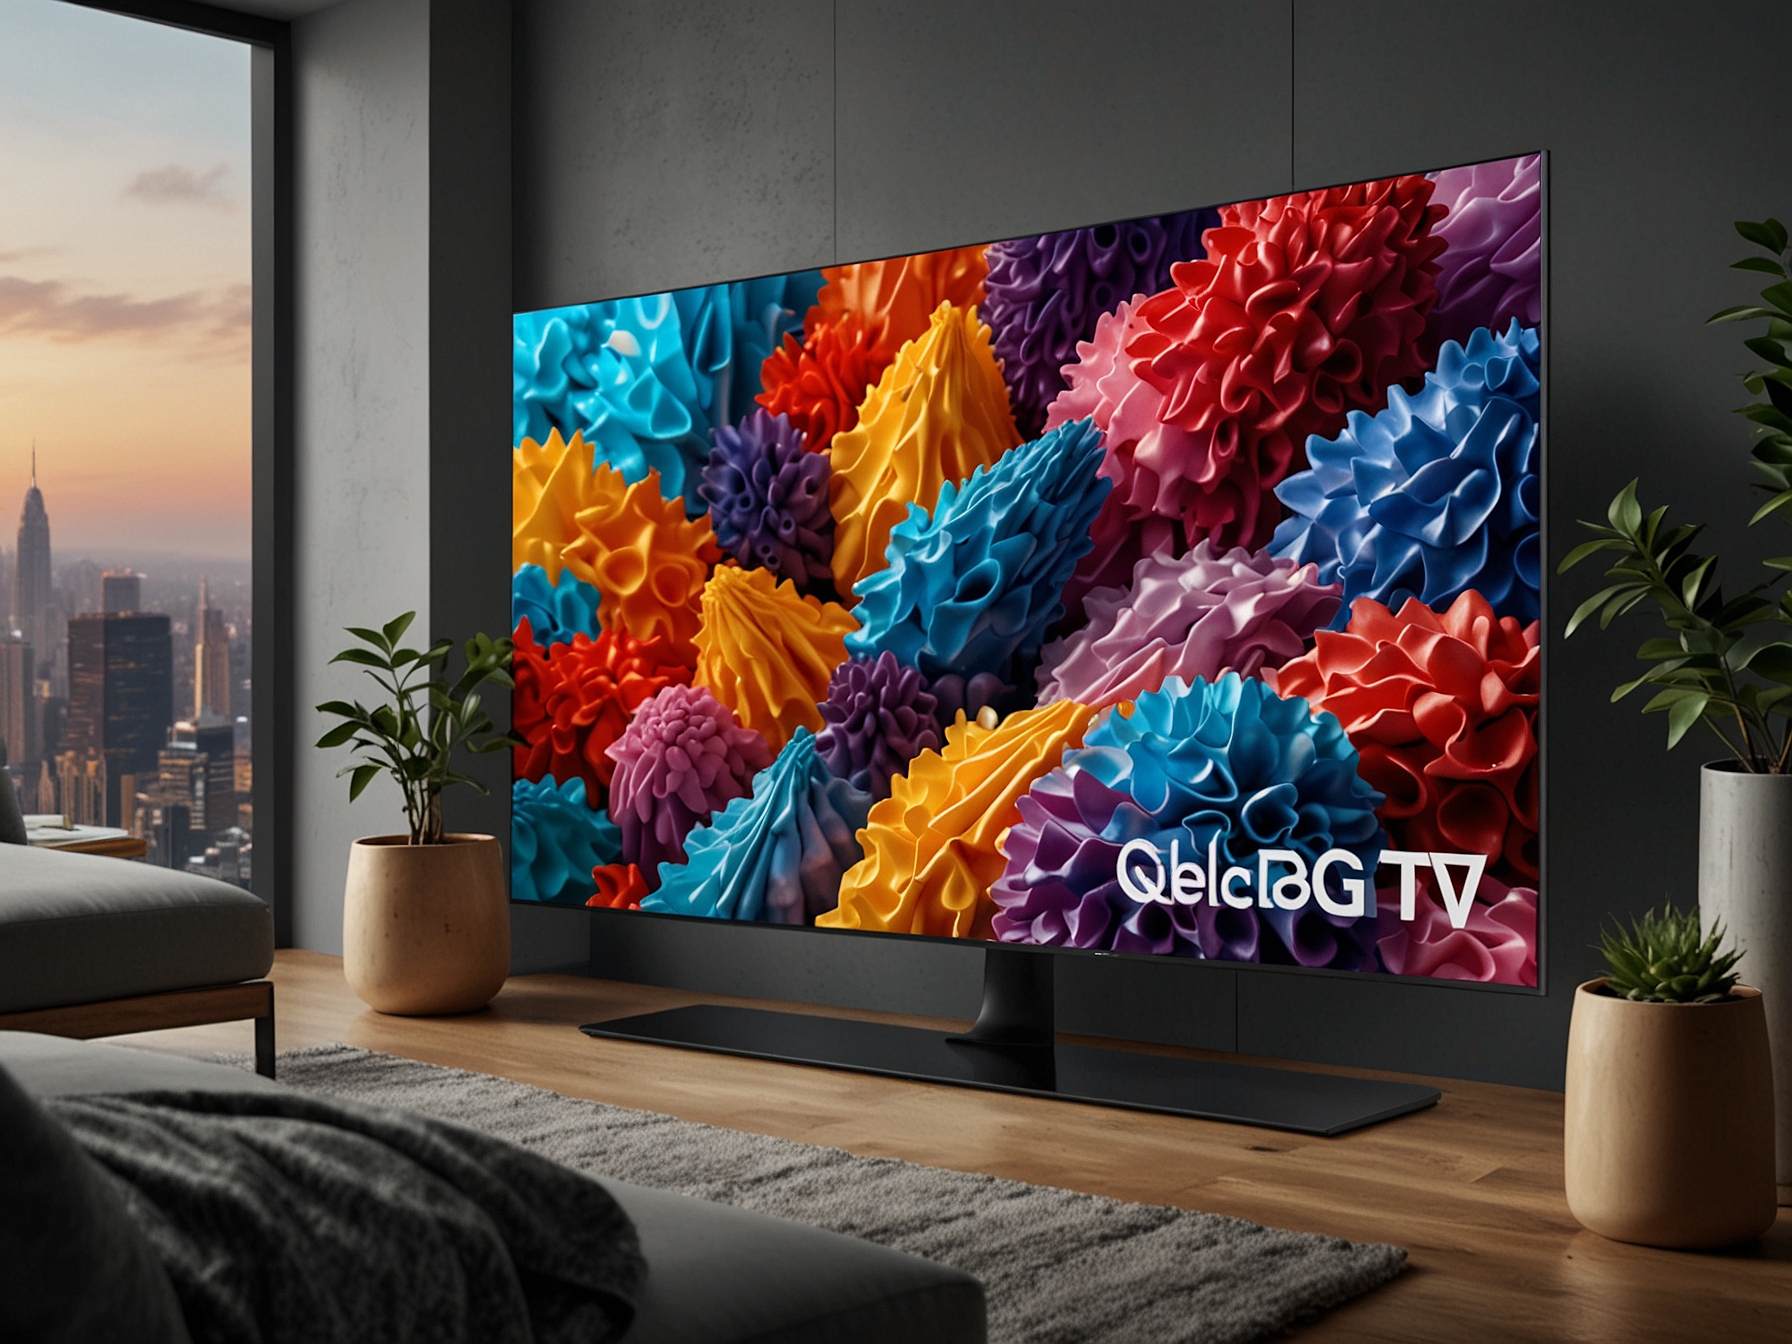 A vibrant 8K QLED TV on display, showcasing Samsung's cutting-edge technology and impressive discount offers during the massive 4th of July sale.